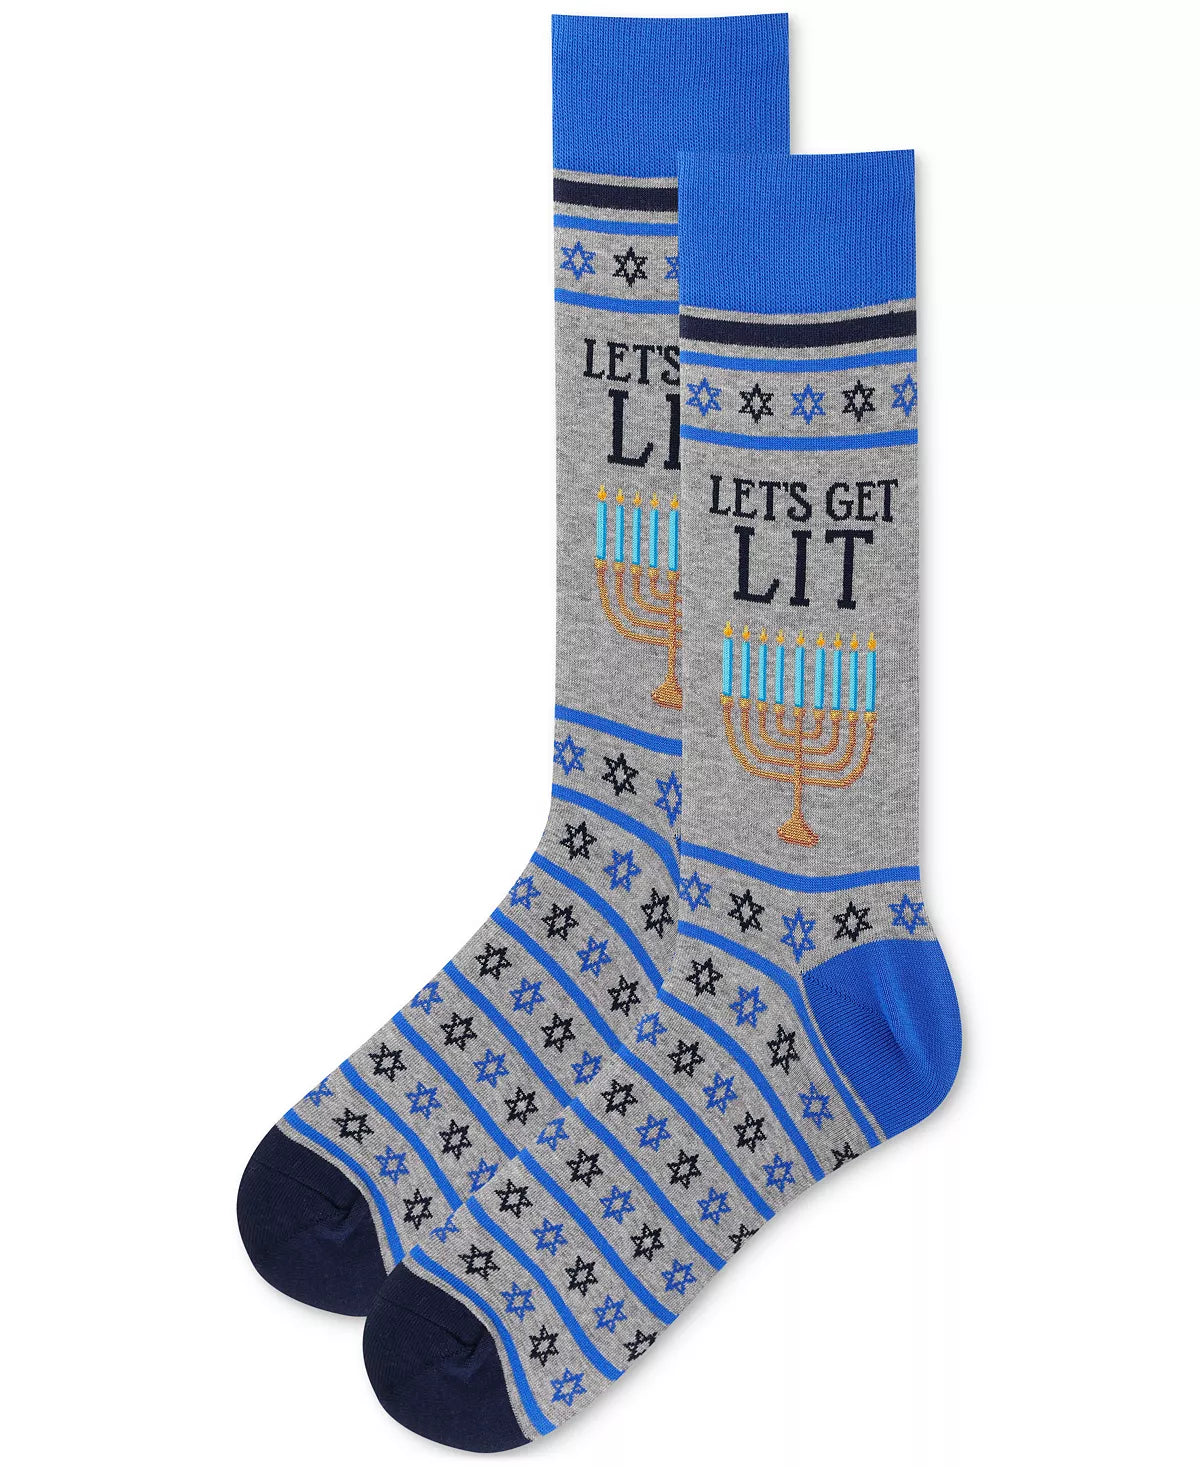 "Let's Get Lit" Crew Socks by Hot Sox